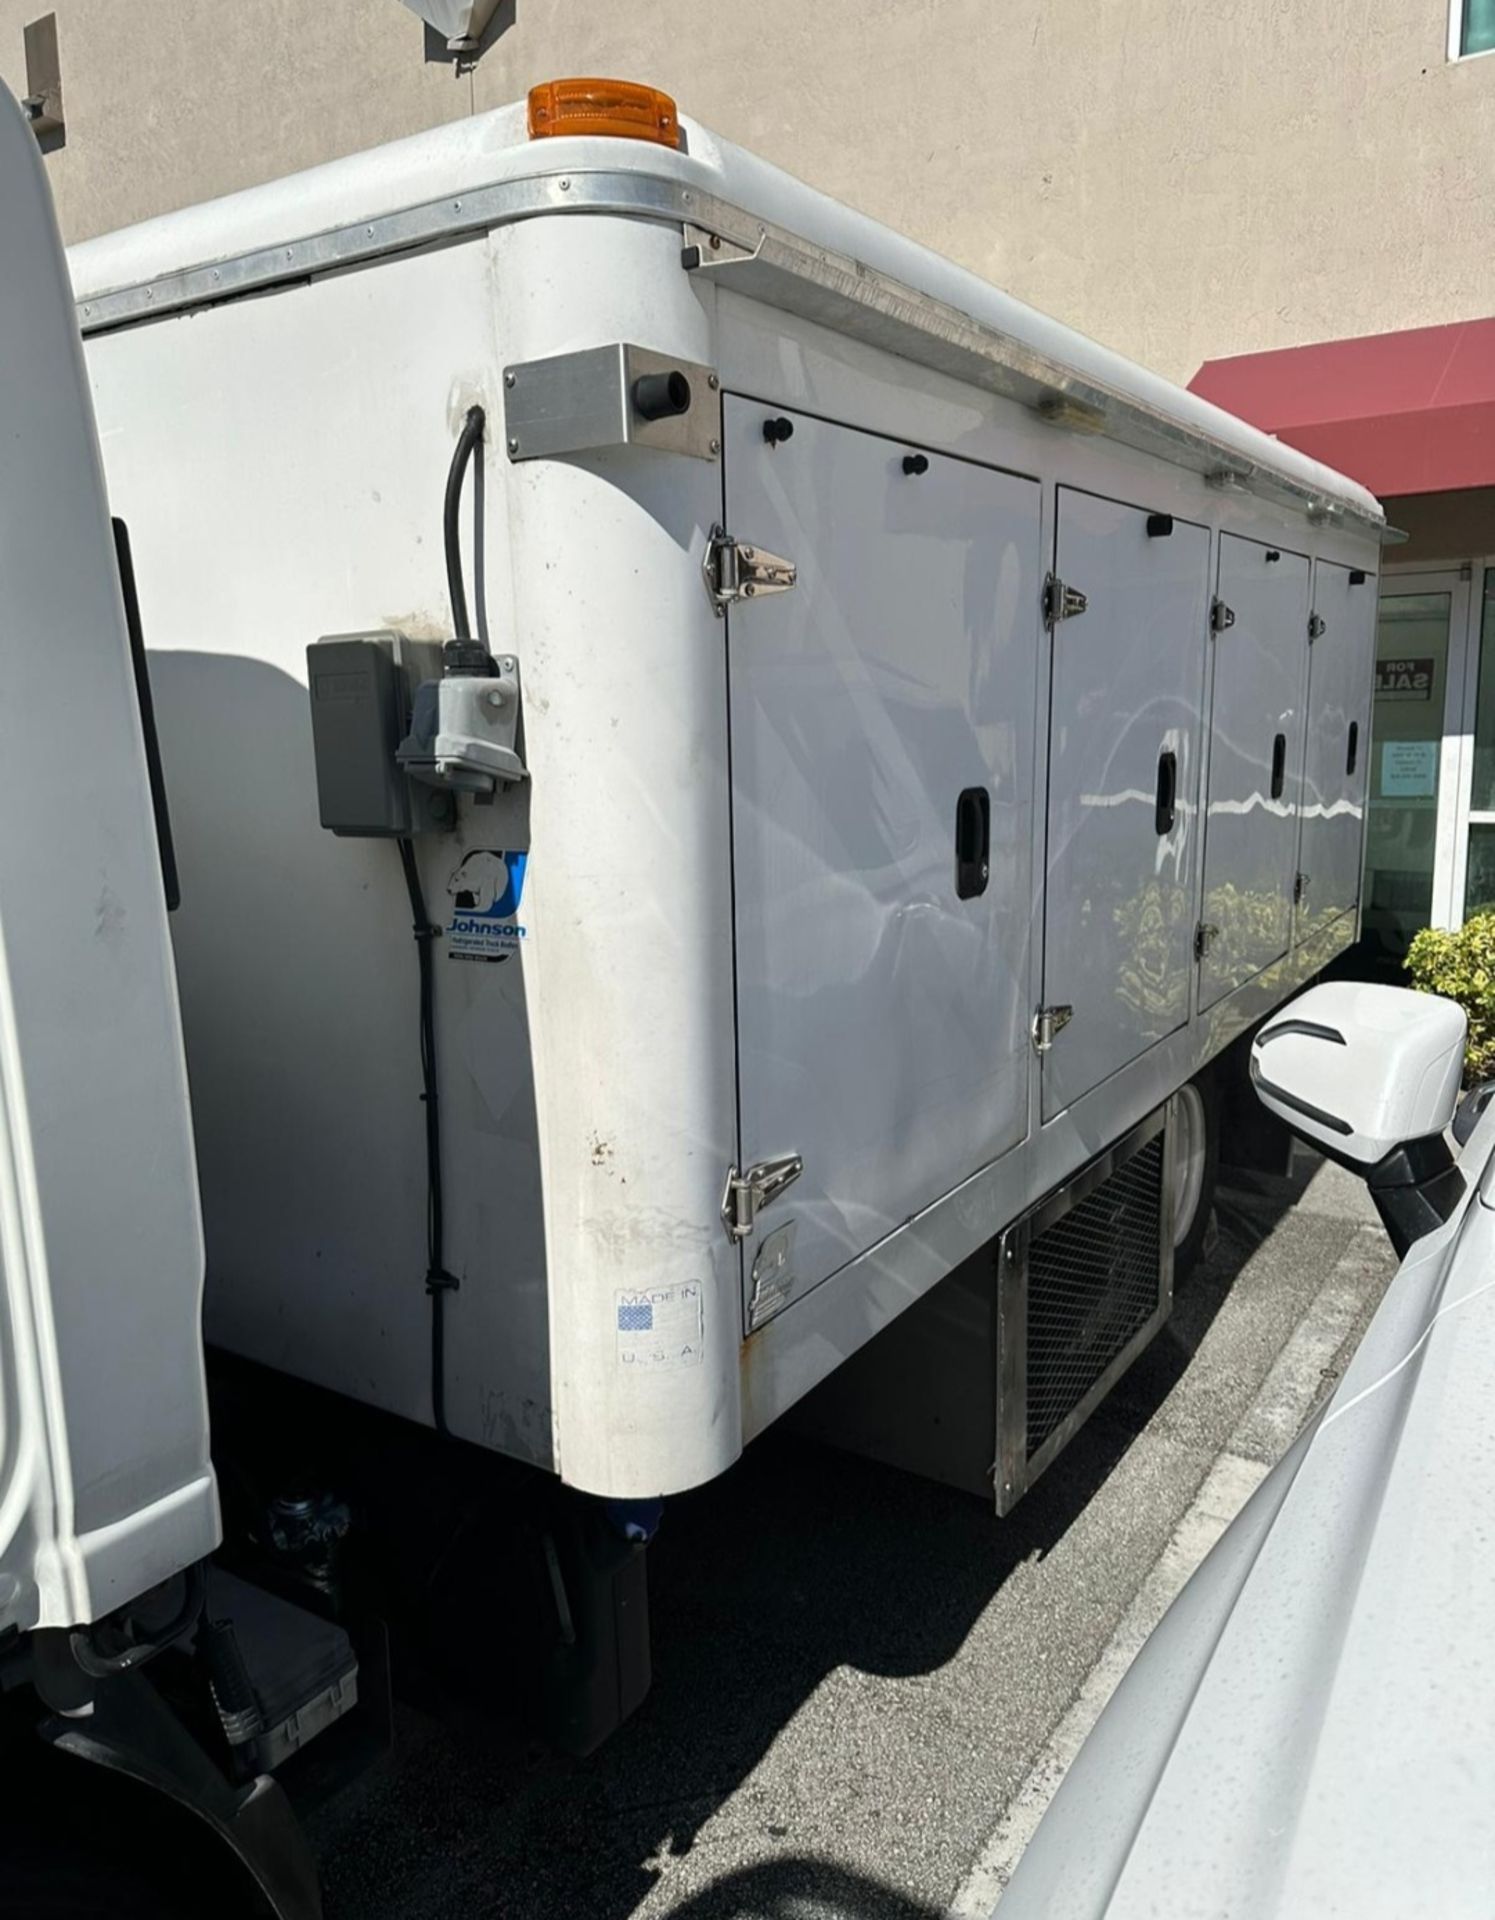 2013 Isuzu NPR Diesel Automatic, Includes: Johnson Refrigeration Body with Cold Plate System - Image 4 of 13